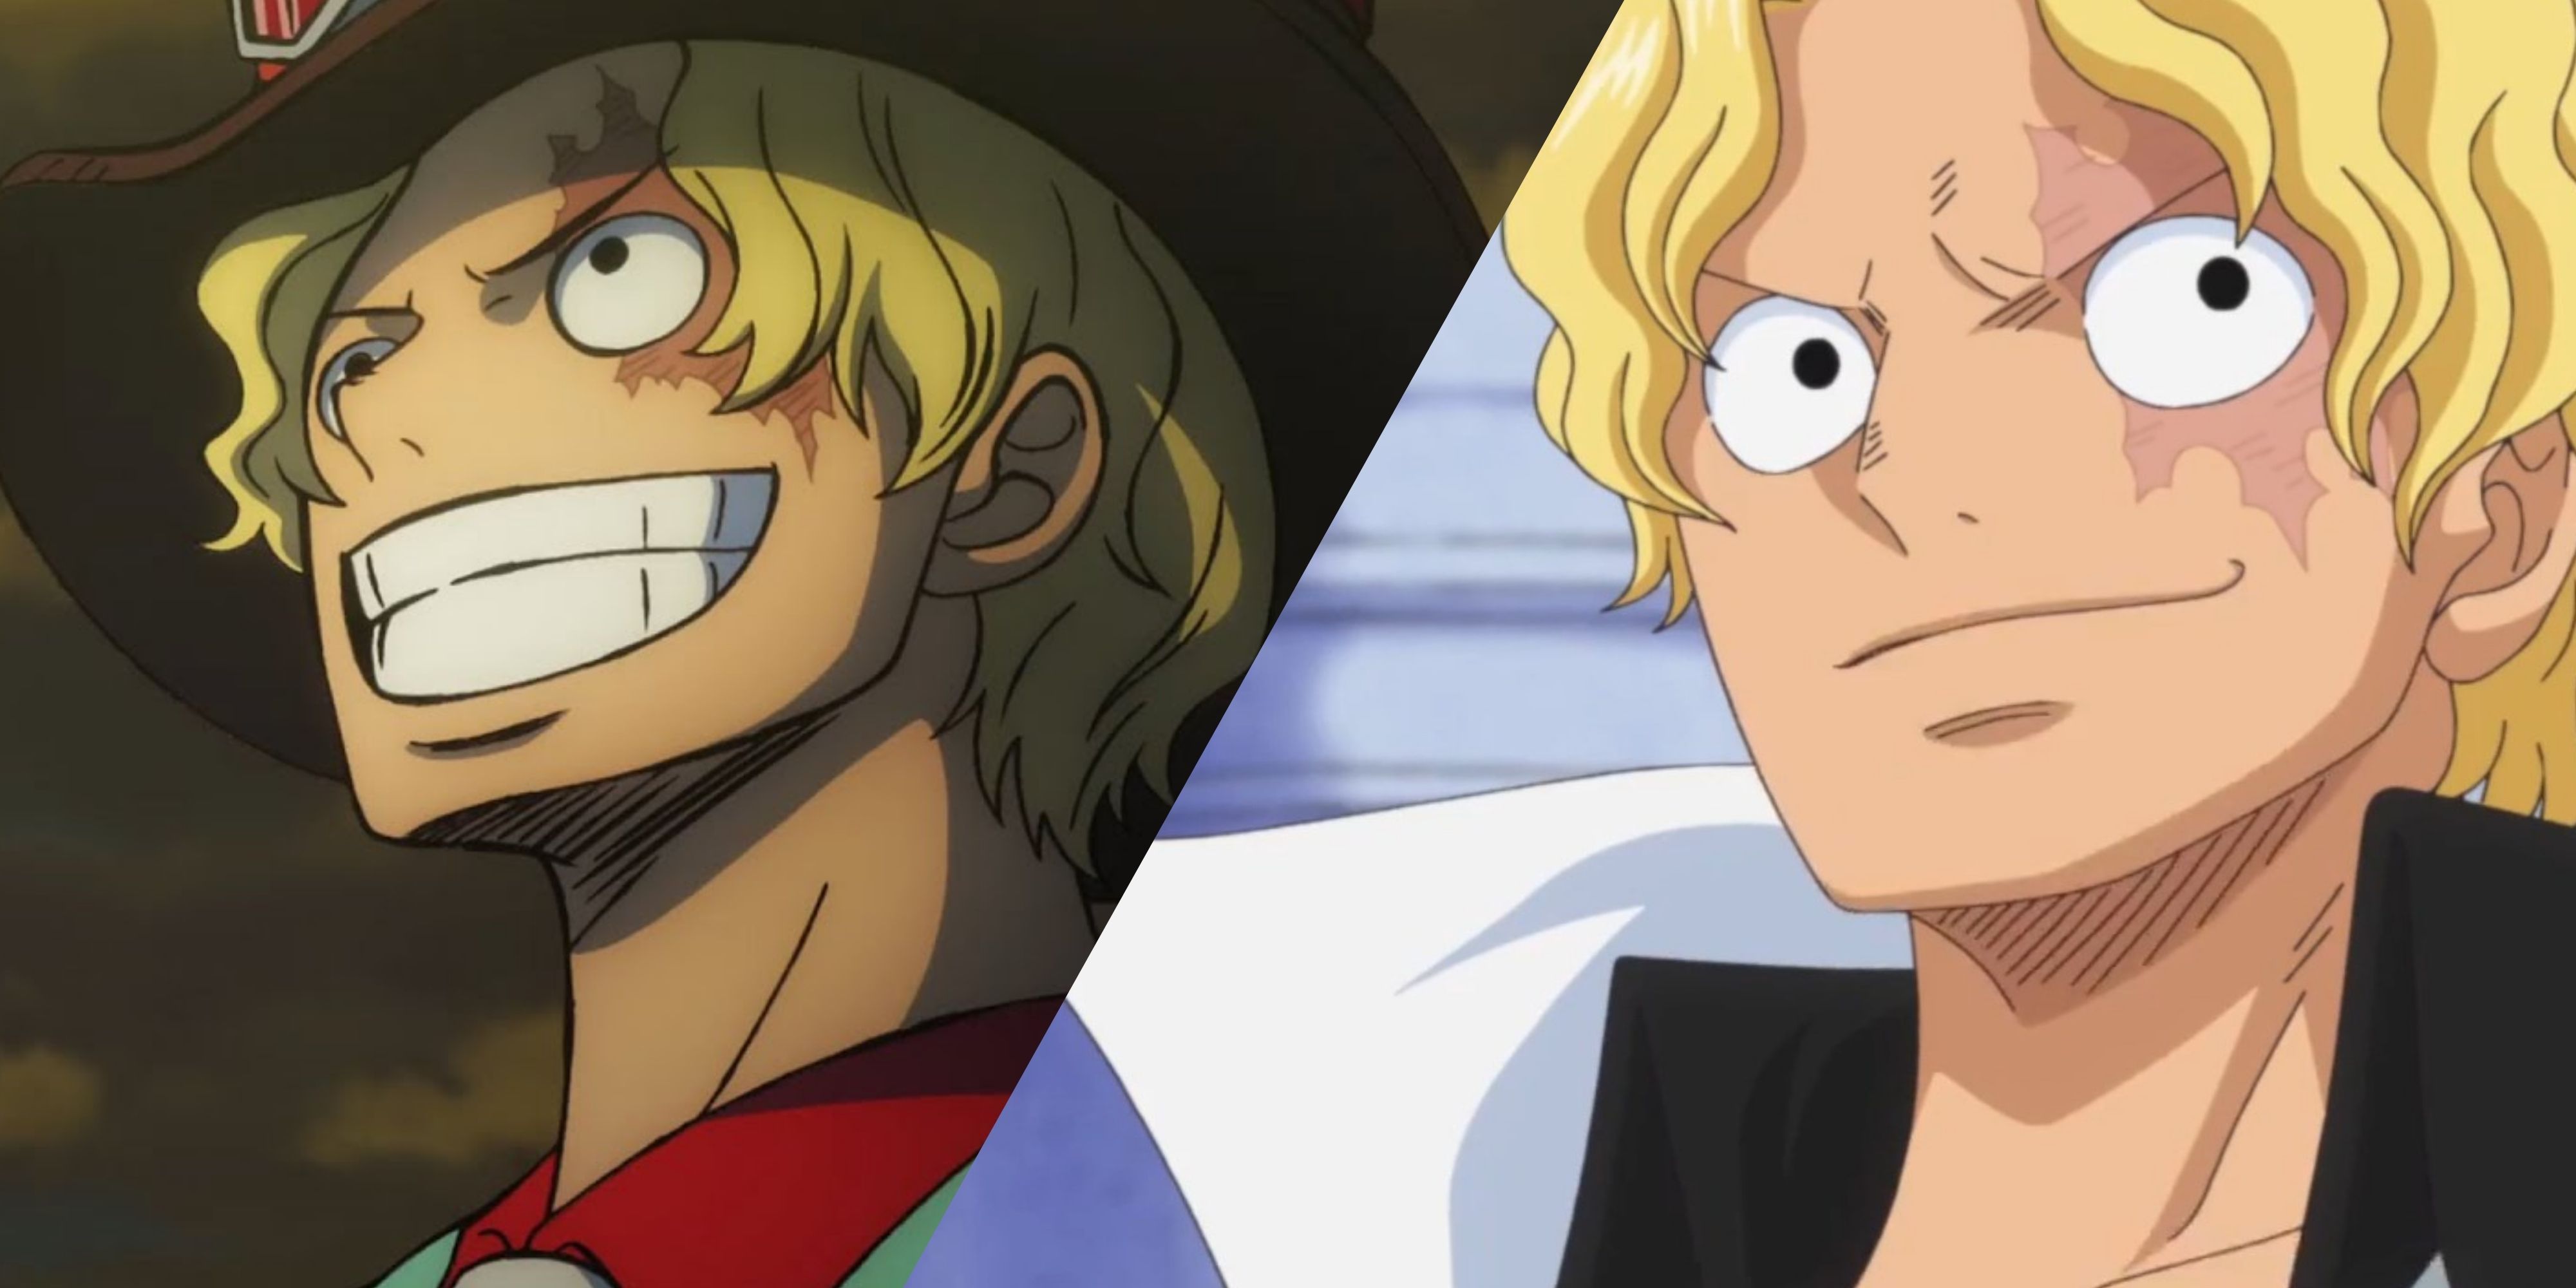 What episode does Sabo appear?